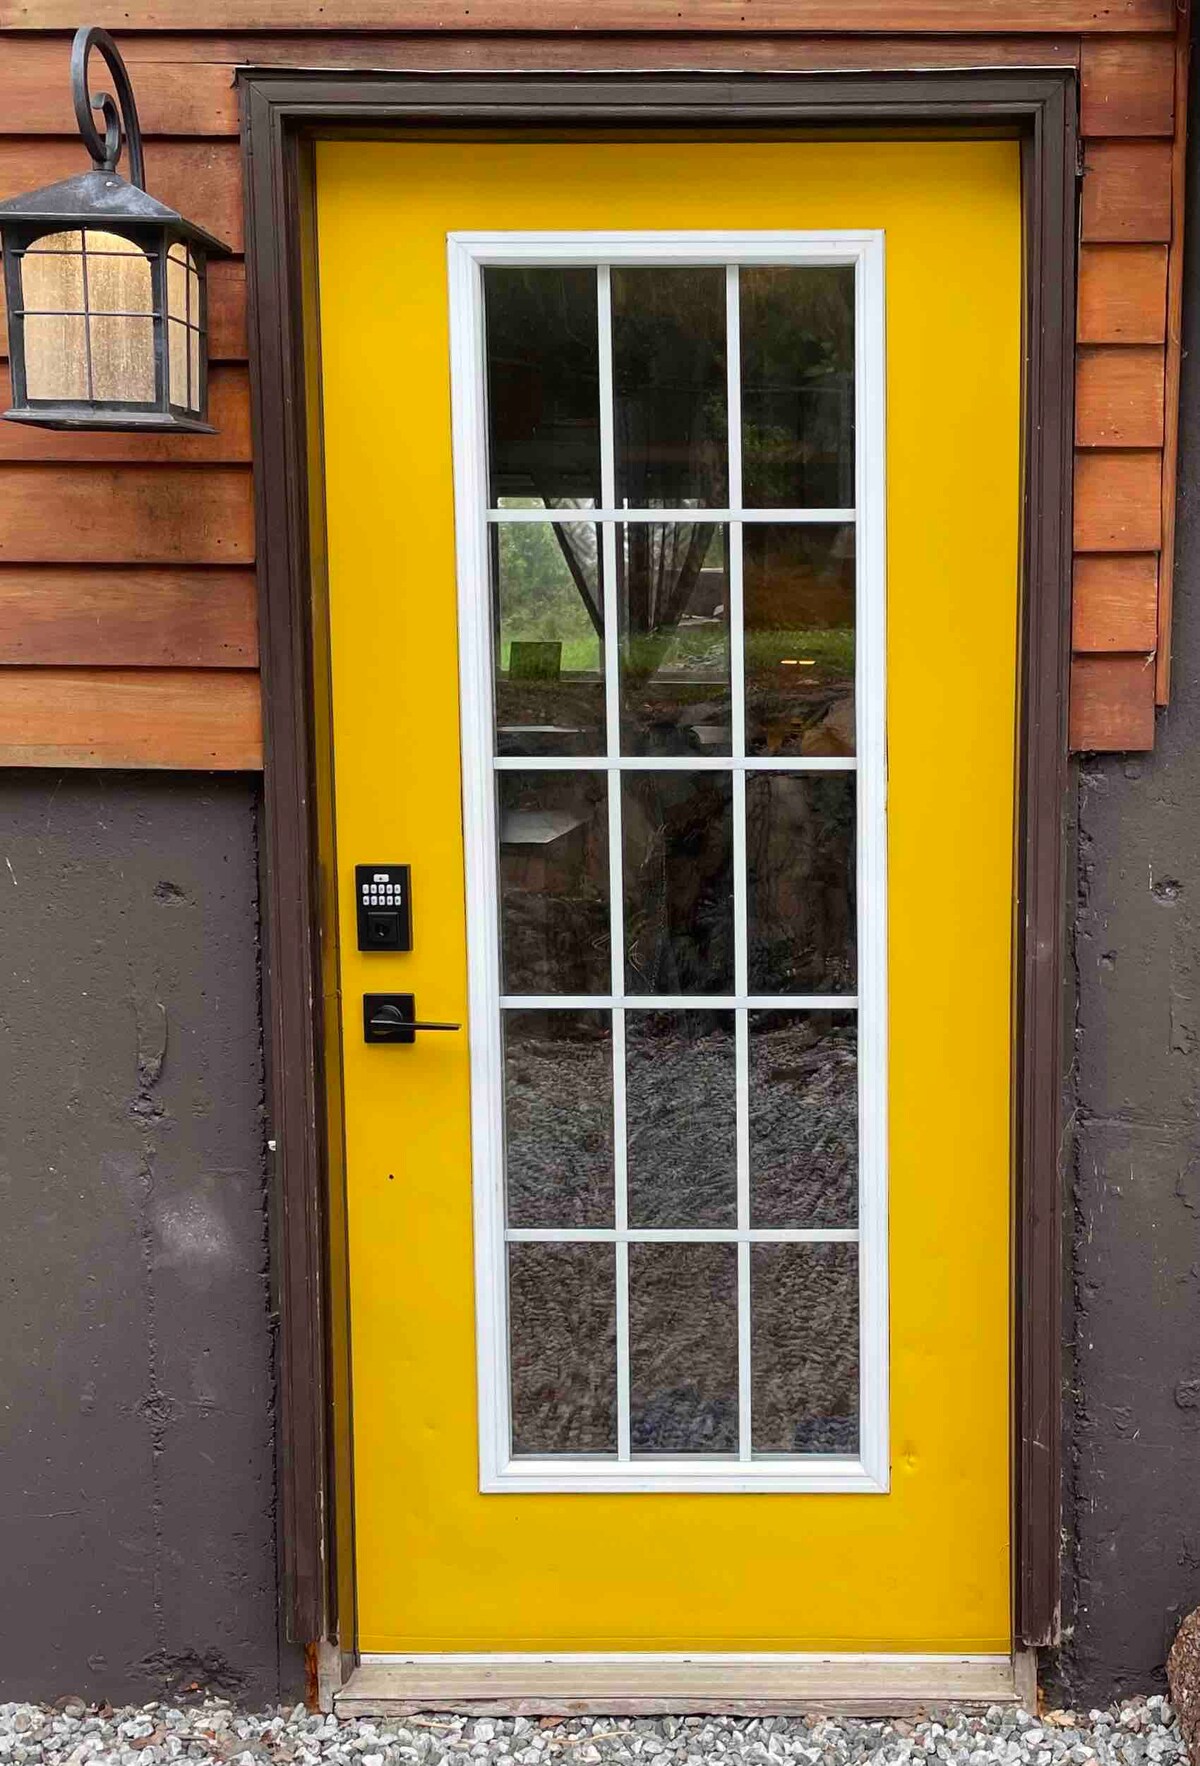 The Yellow Door - Close to the Hospital